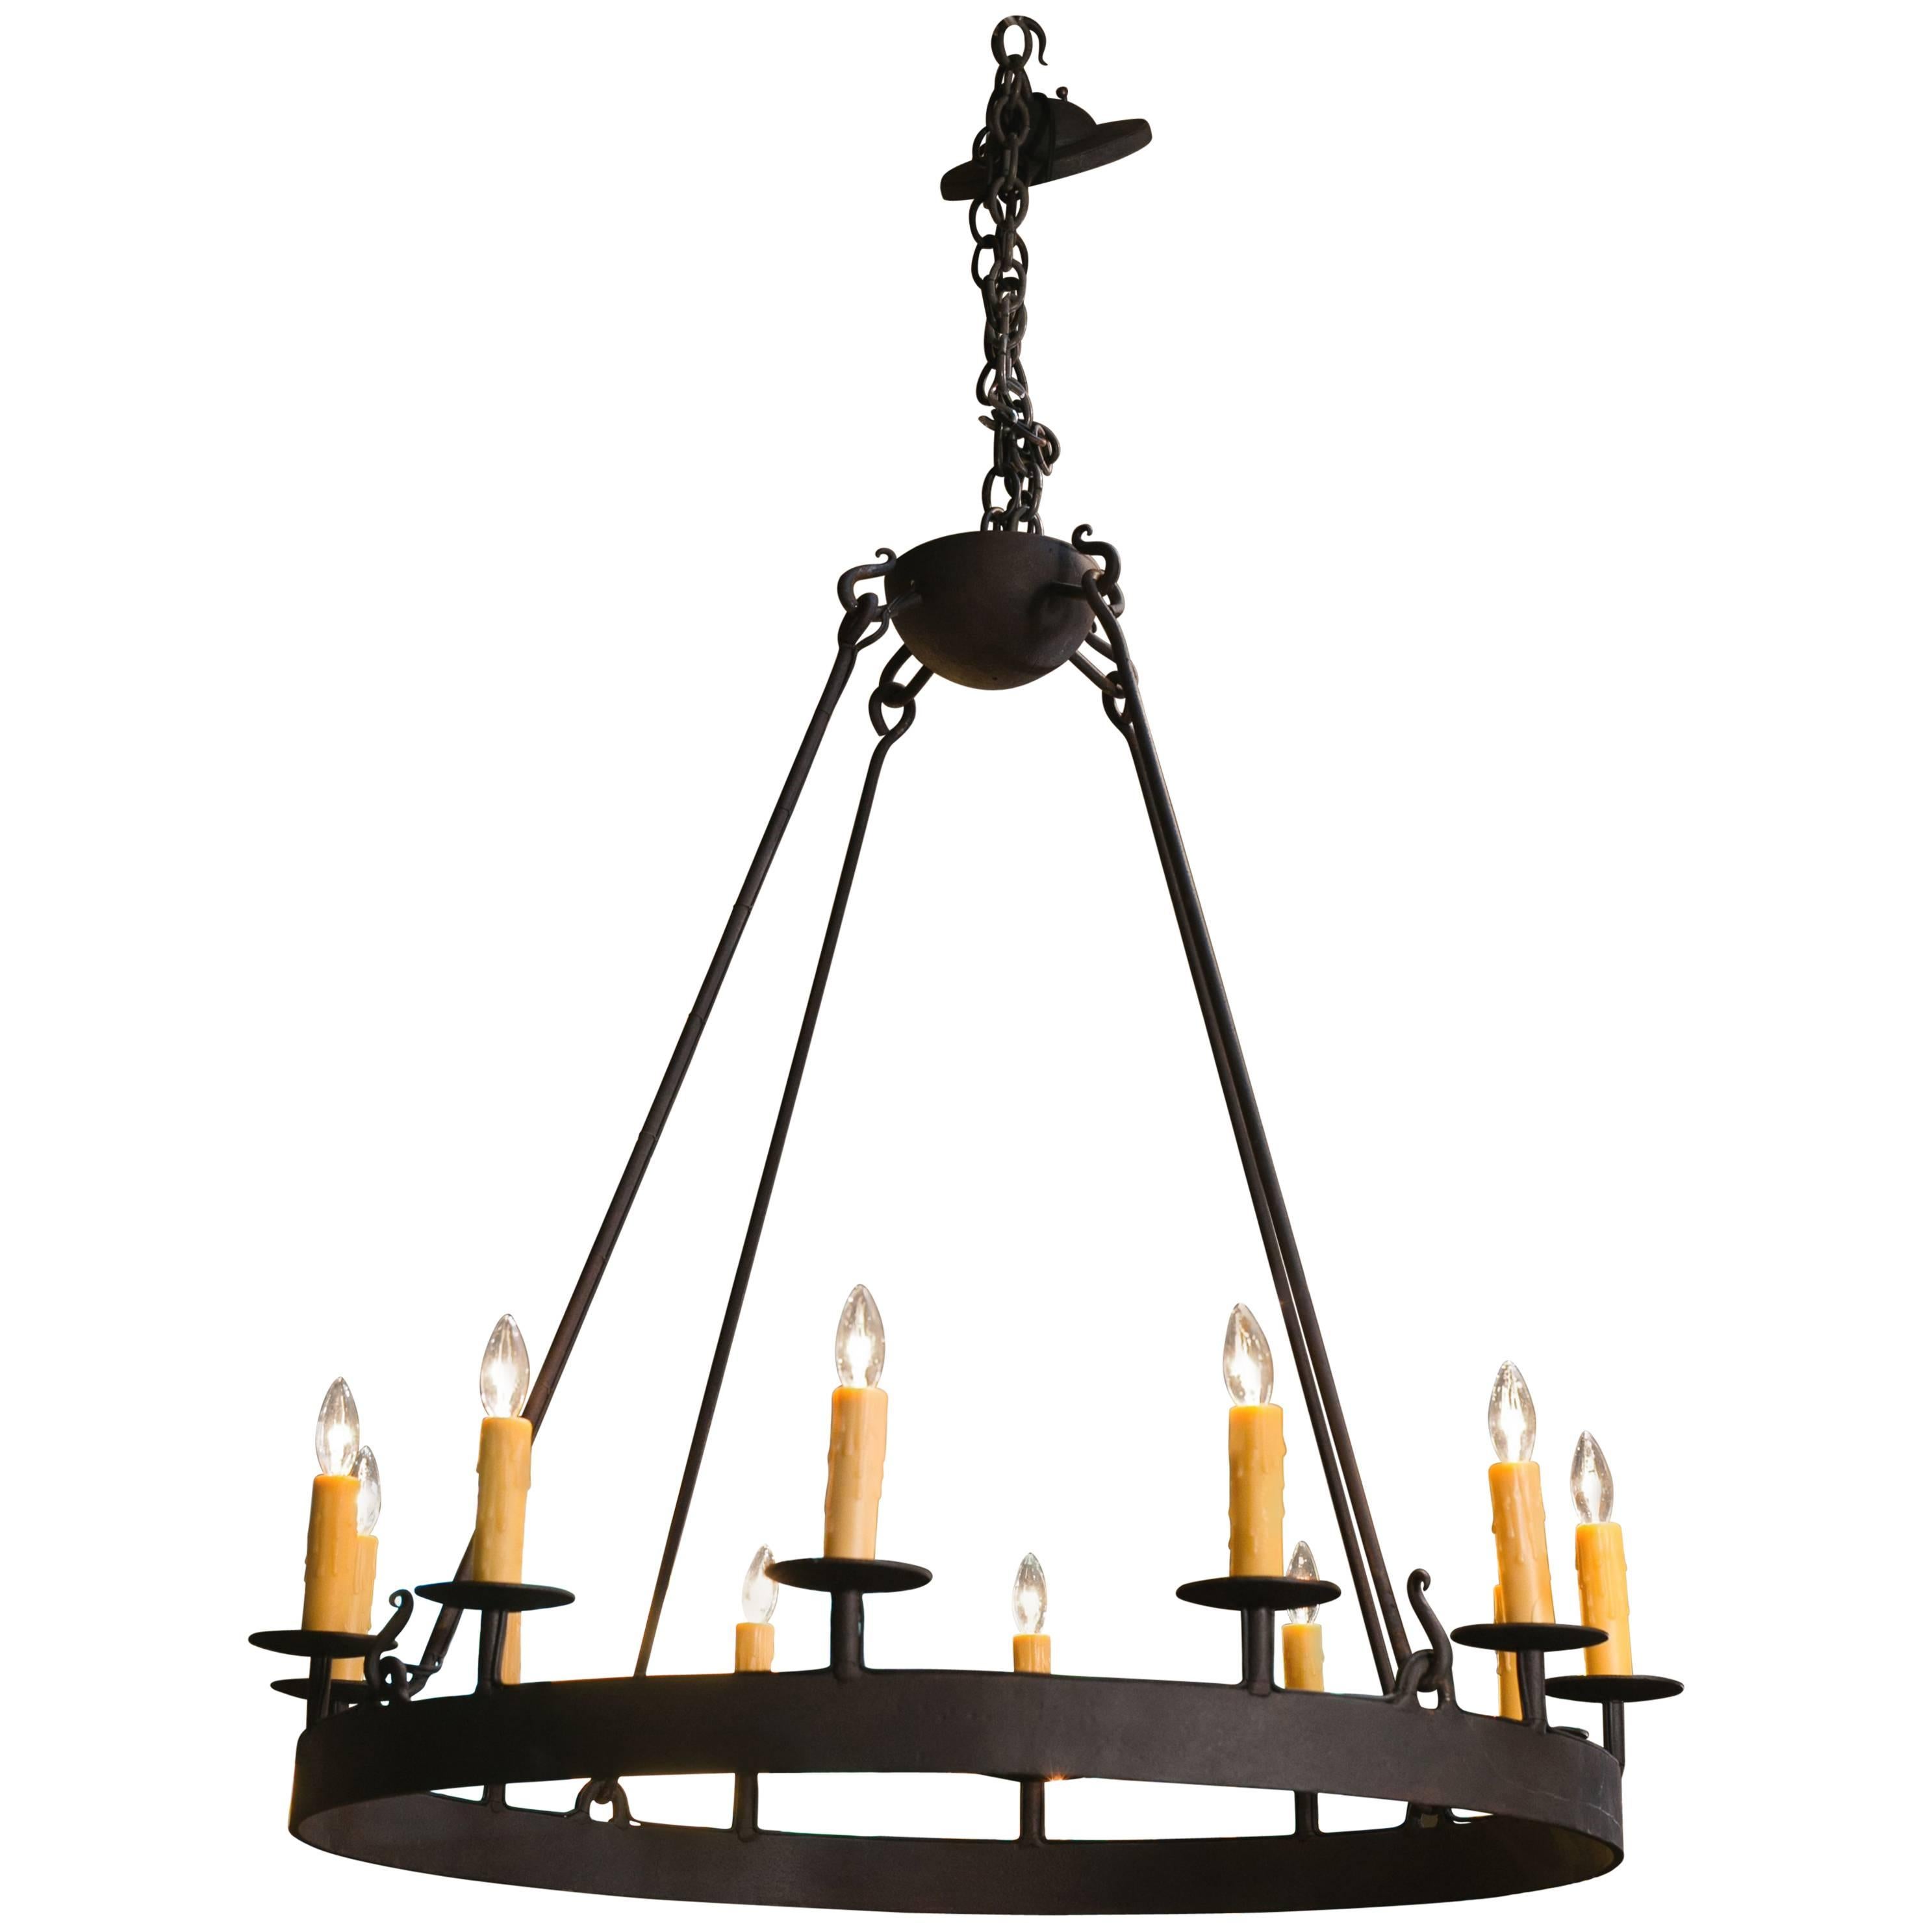 Custom, Hand-Forged American Made Iron Ring Chandelier with Twelve Sockets